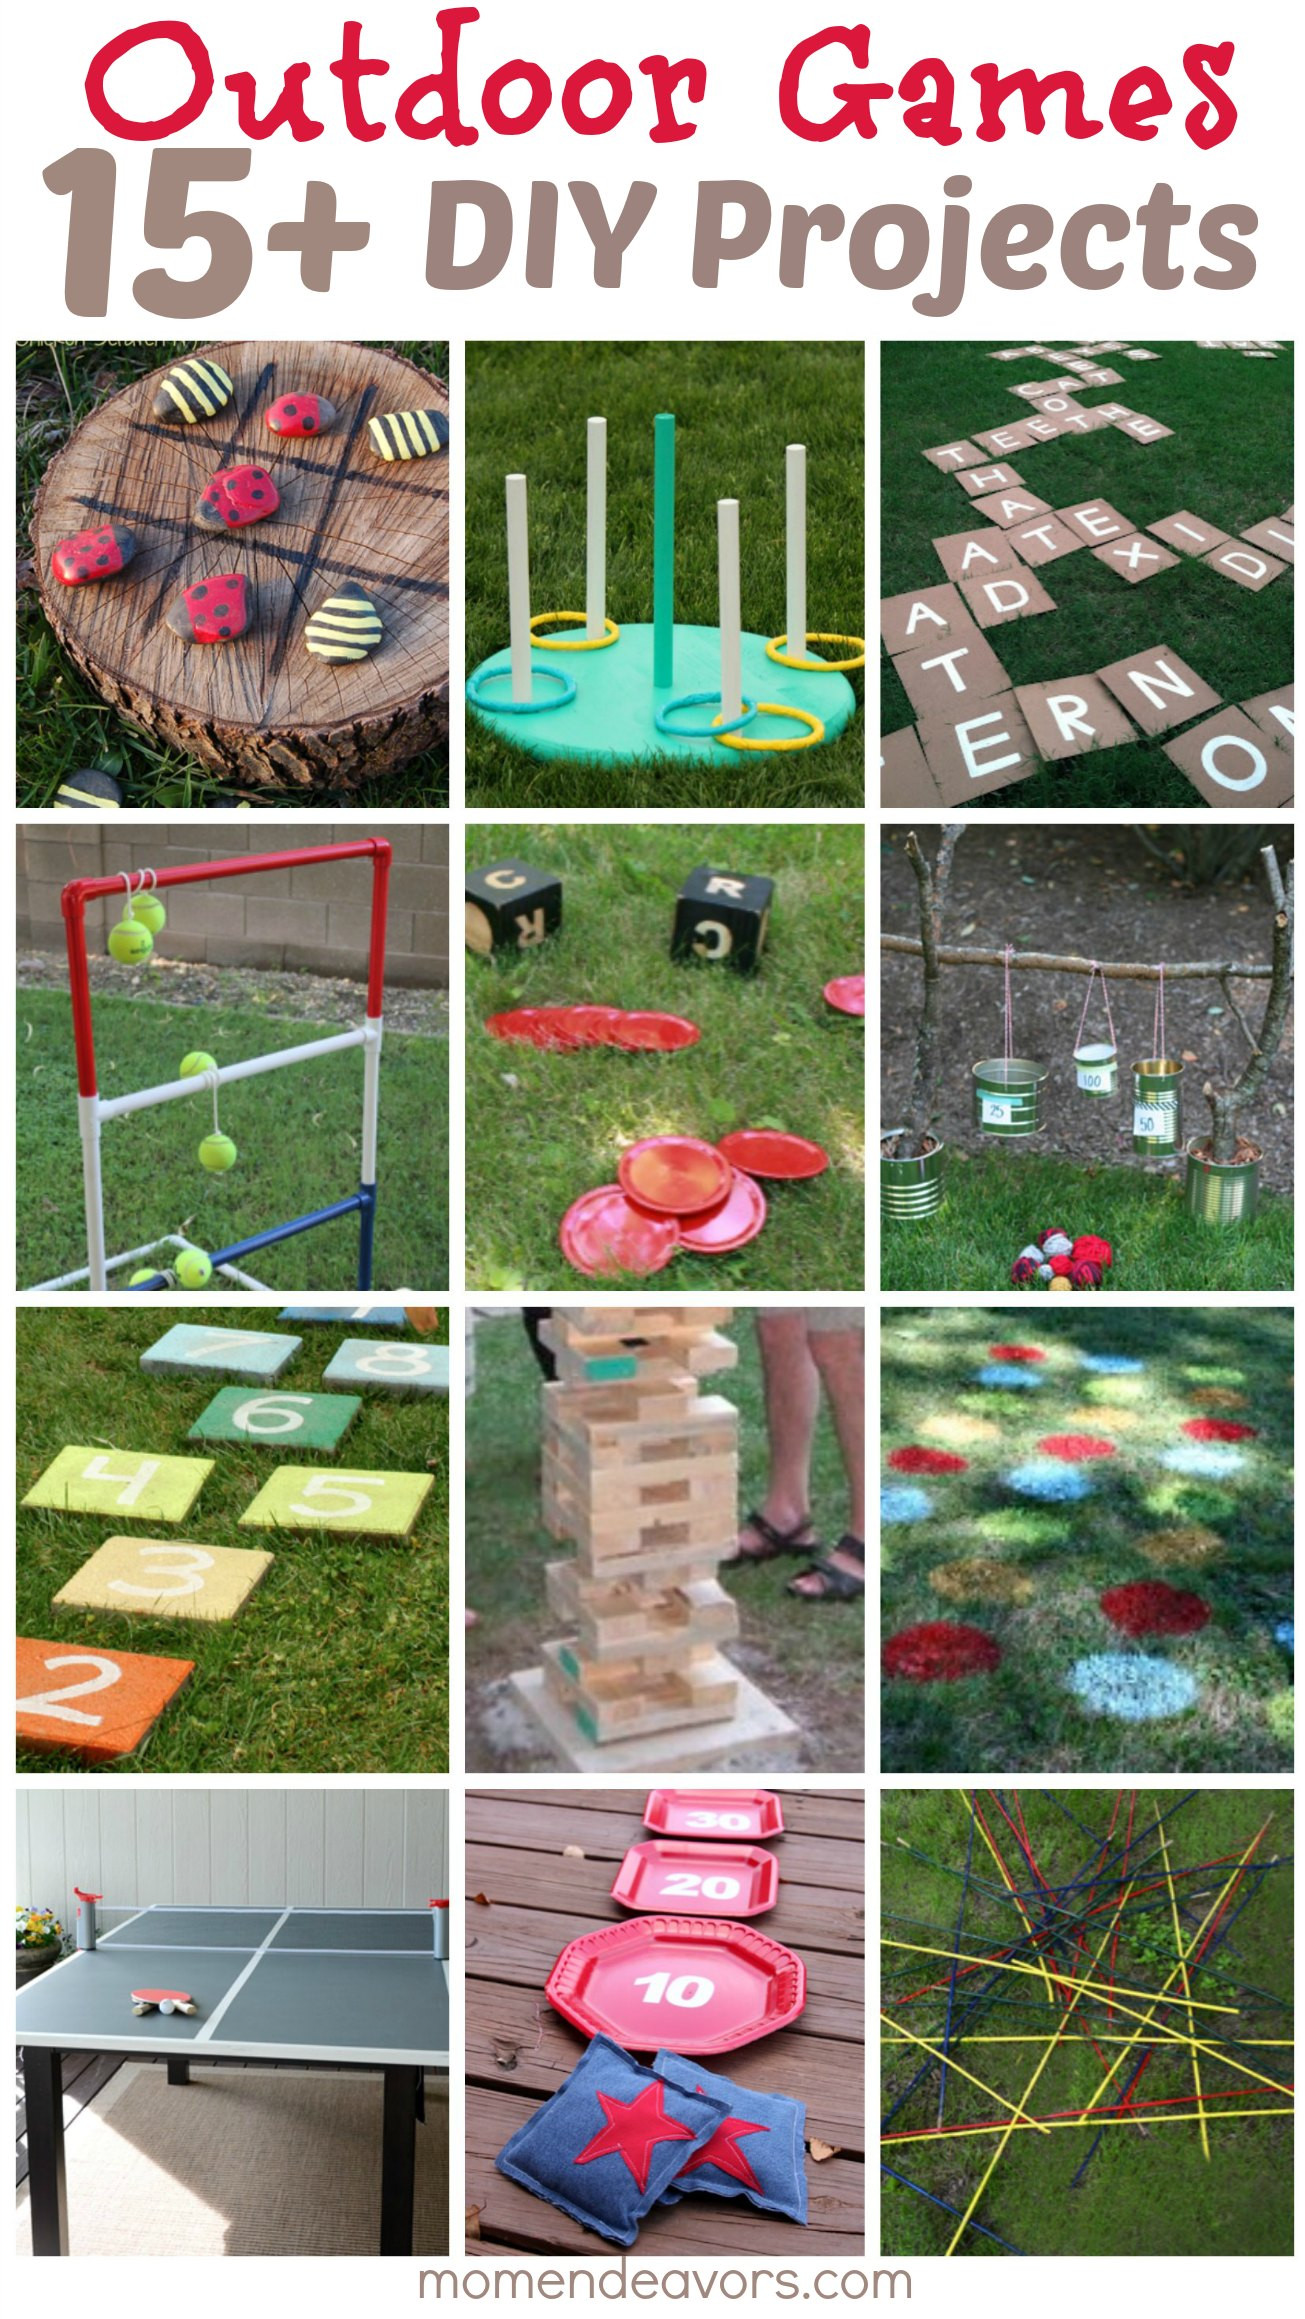 Backyard Games For Toddlers
 DIY Outdoor Games – 15 Awesome Project Ideas for Backyard